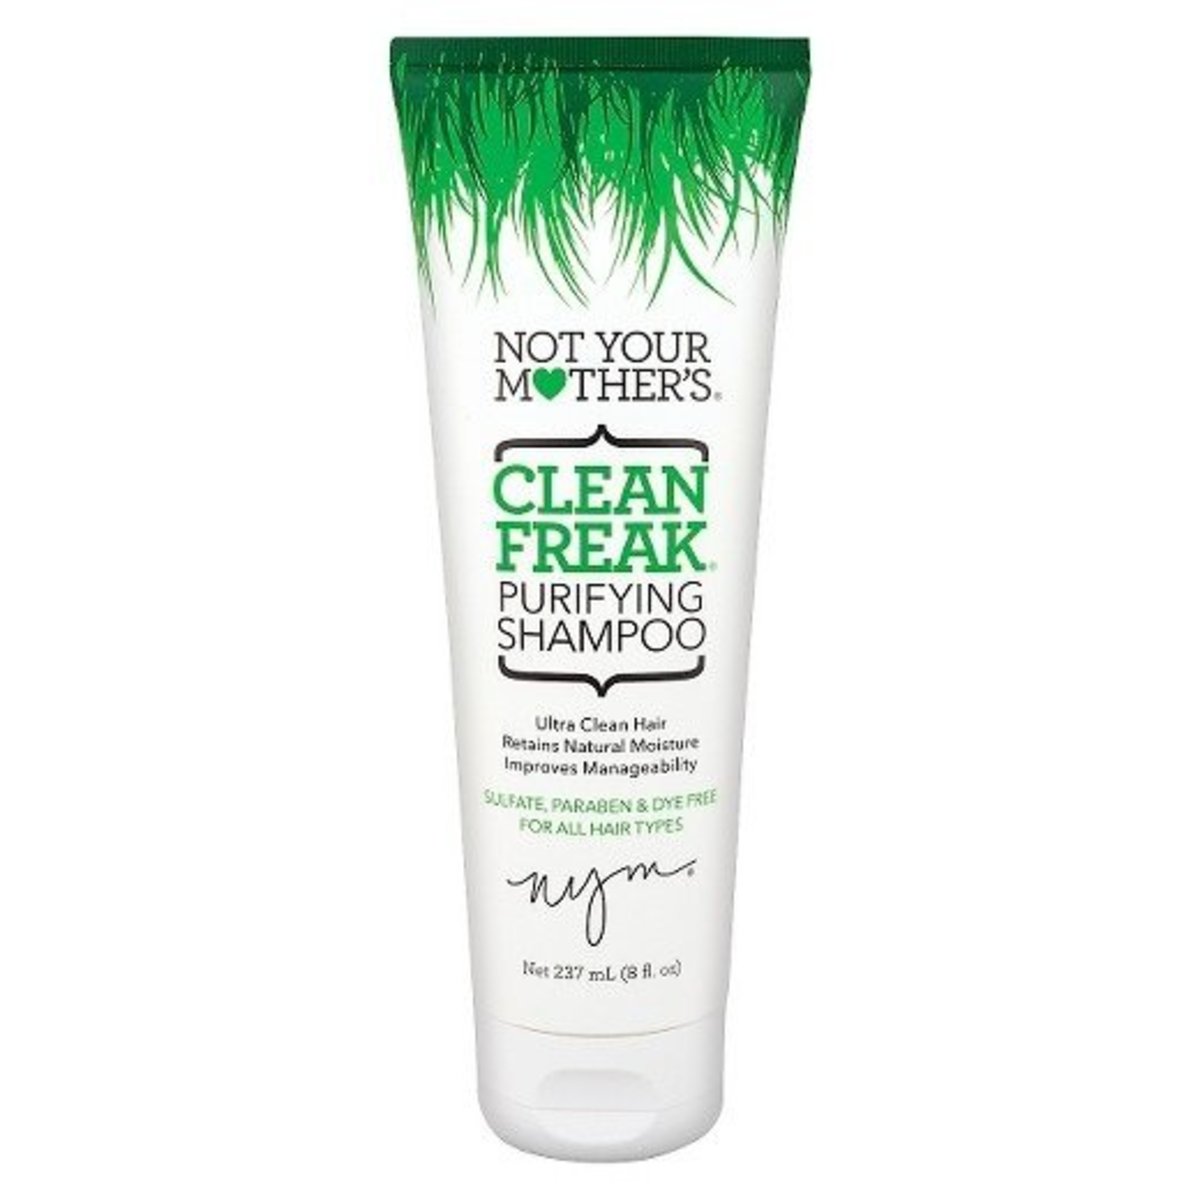 Not Your Mothers Clean Freak Purifying Shampoo